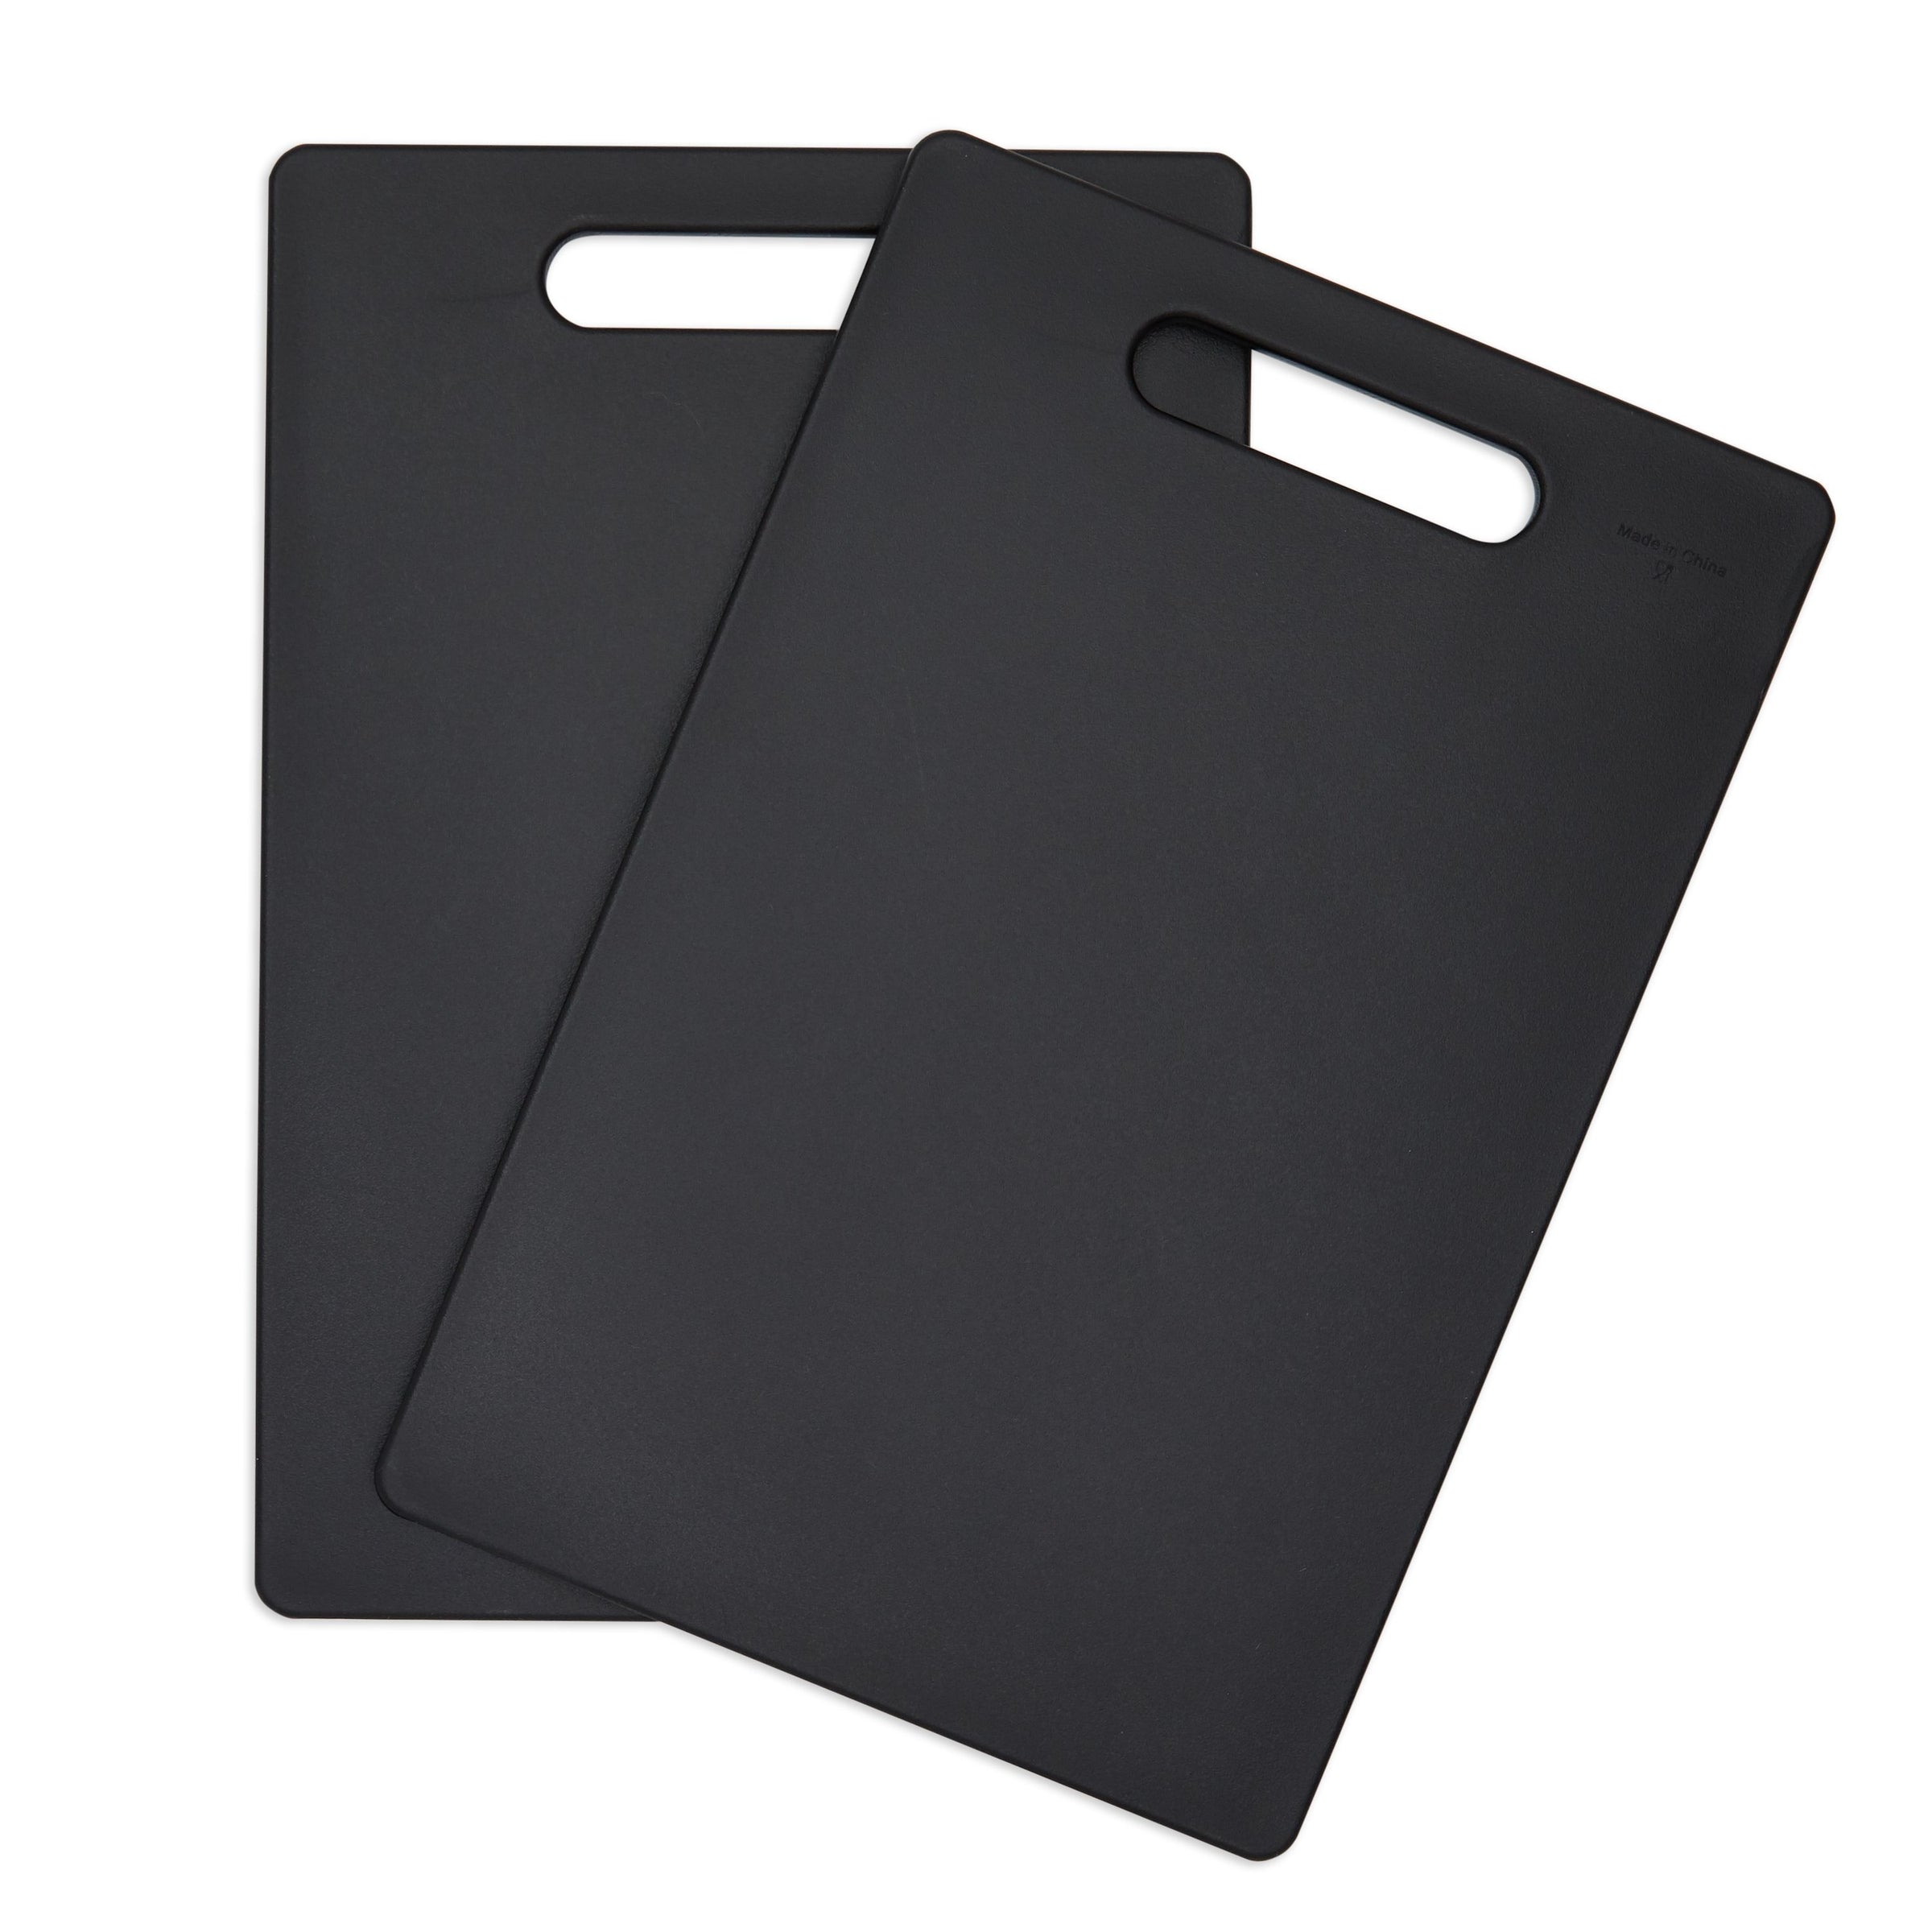 2 Pack Small Plastic Cutting Boards for Kitchen with Handles for